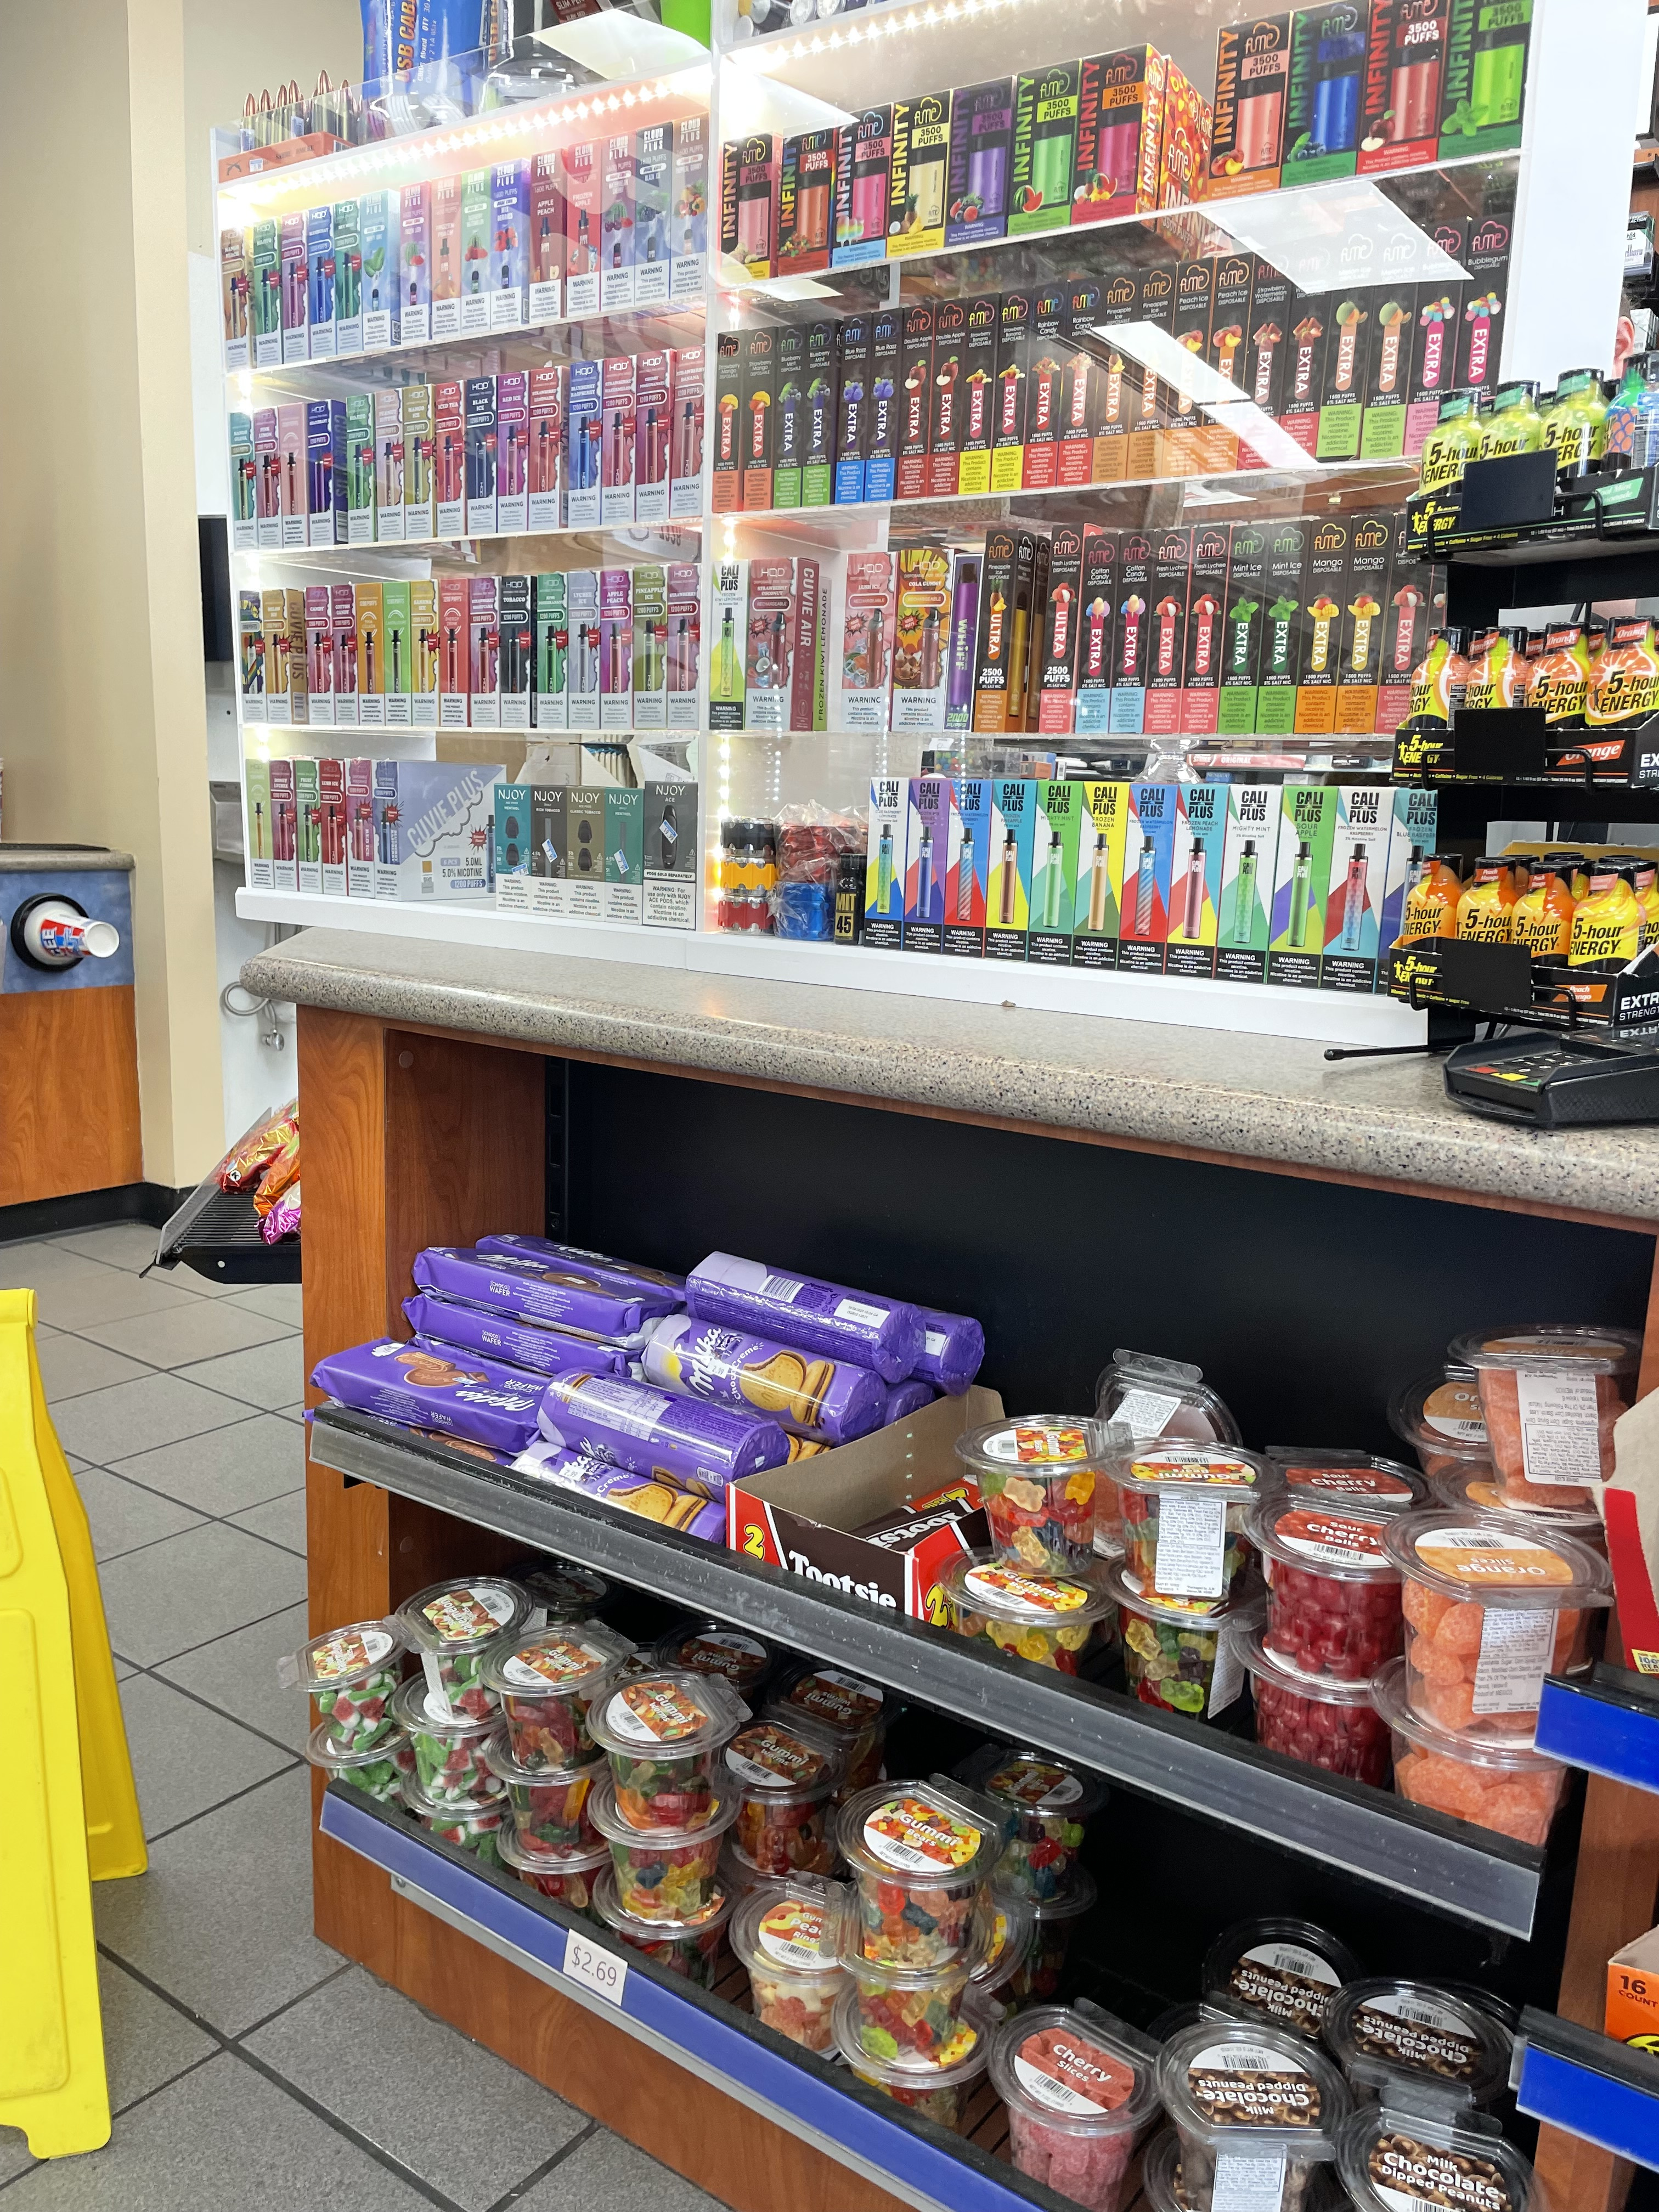 display of flavored e-cigarettes on the counter above gummies and sweets